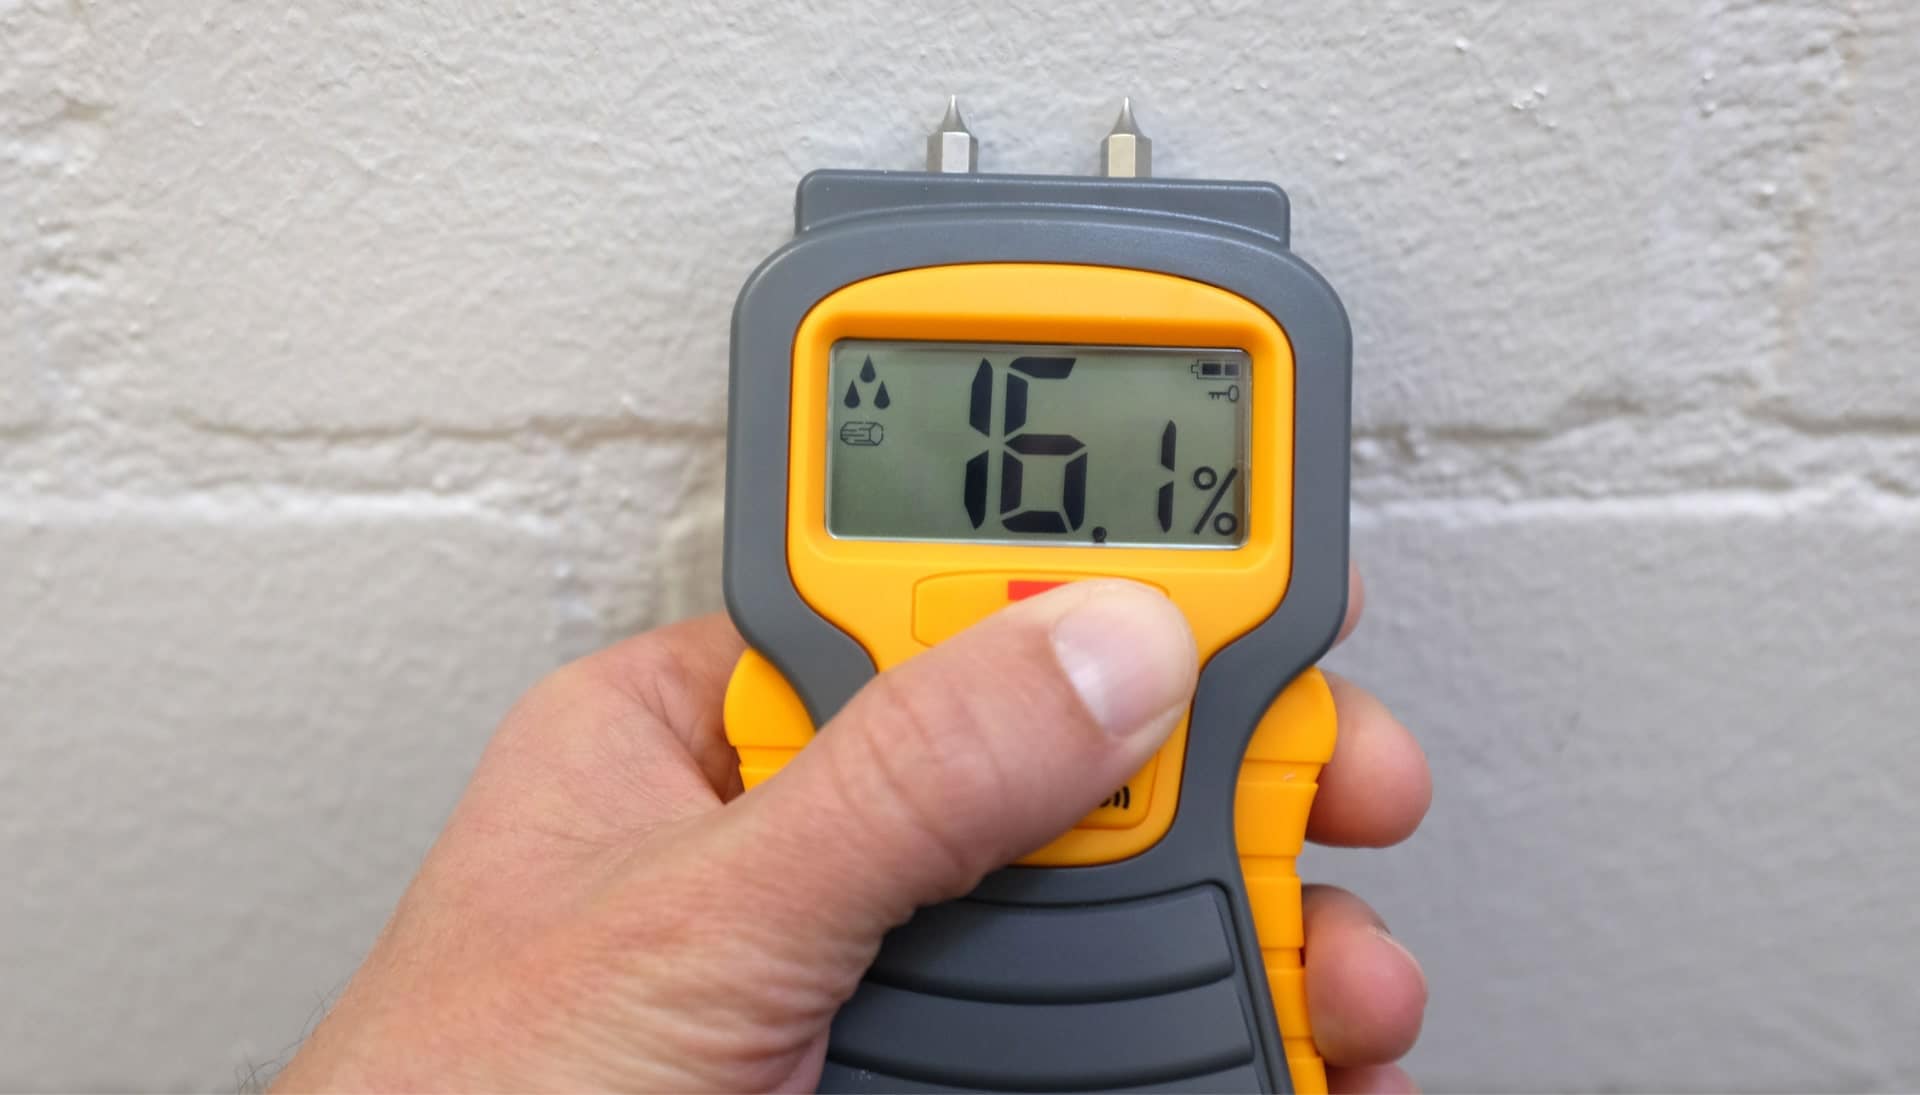 We provide fast, accurate, and affordable mold testing services in Spokane, Washington.